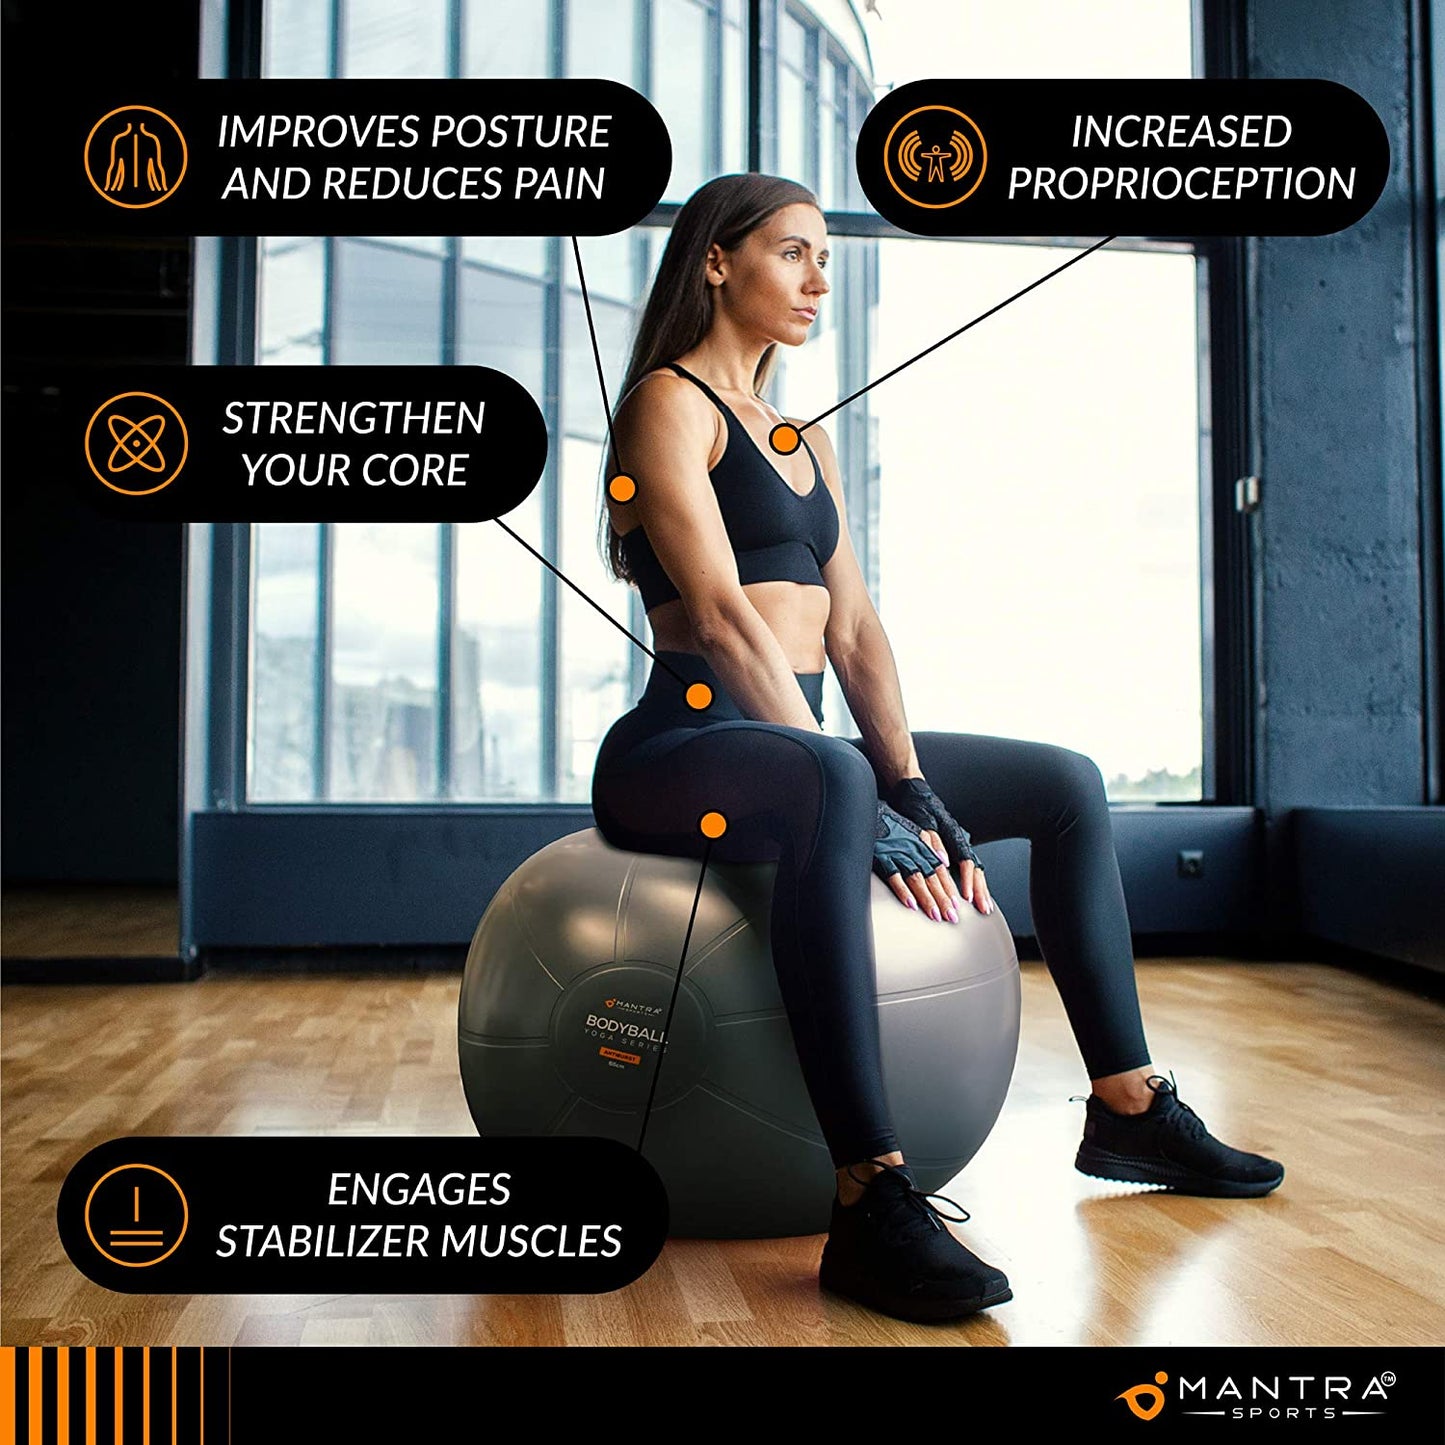 Exercise Ball Yoga Ball Chair for Fitness, Stability, Pilates, Pregnancy, Birthing, Therapy or Workout - 55Cm / 65Cm / 75Cm Extra Thick, Anti-Burst & Non-Slip, Gym Quality Balance Ball - Pump & Guide